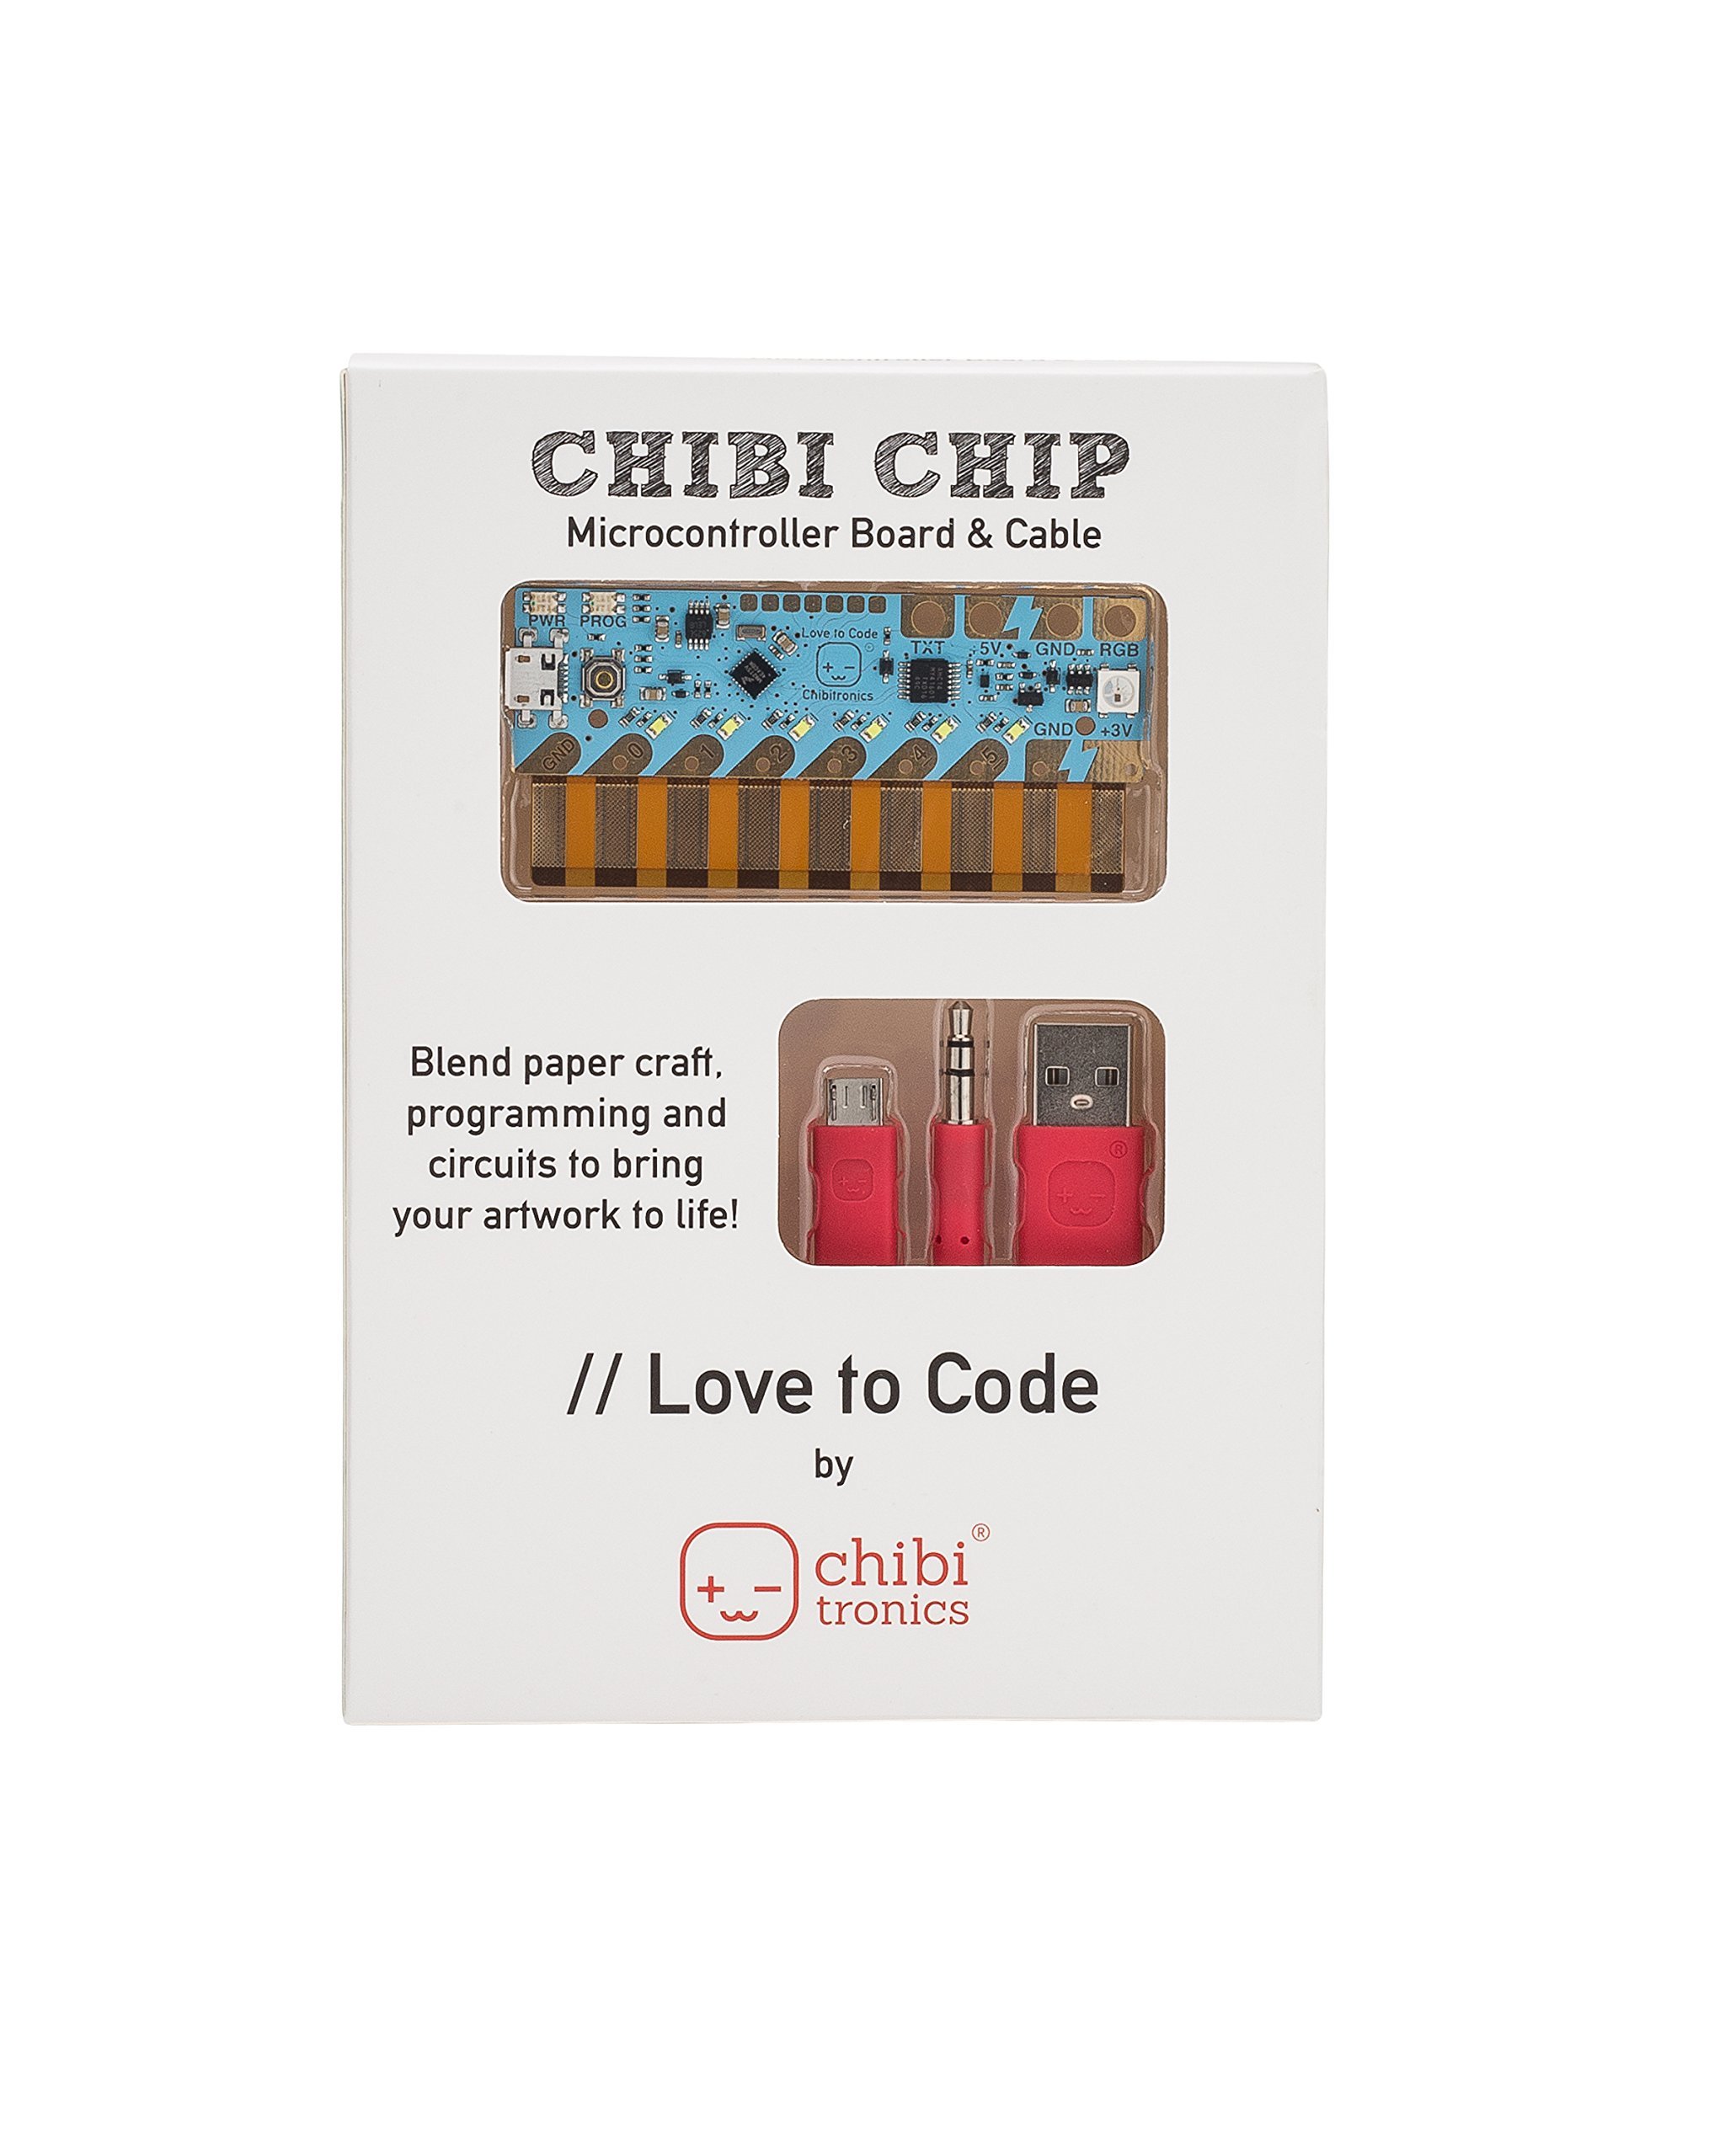 Book Cover Chibitronics Love to Code - Chibi Chip with Cable